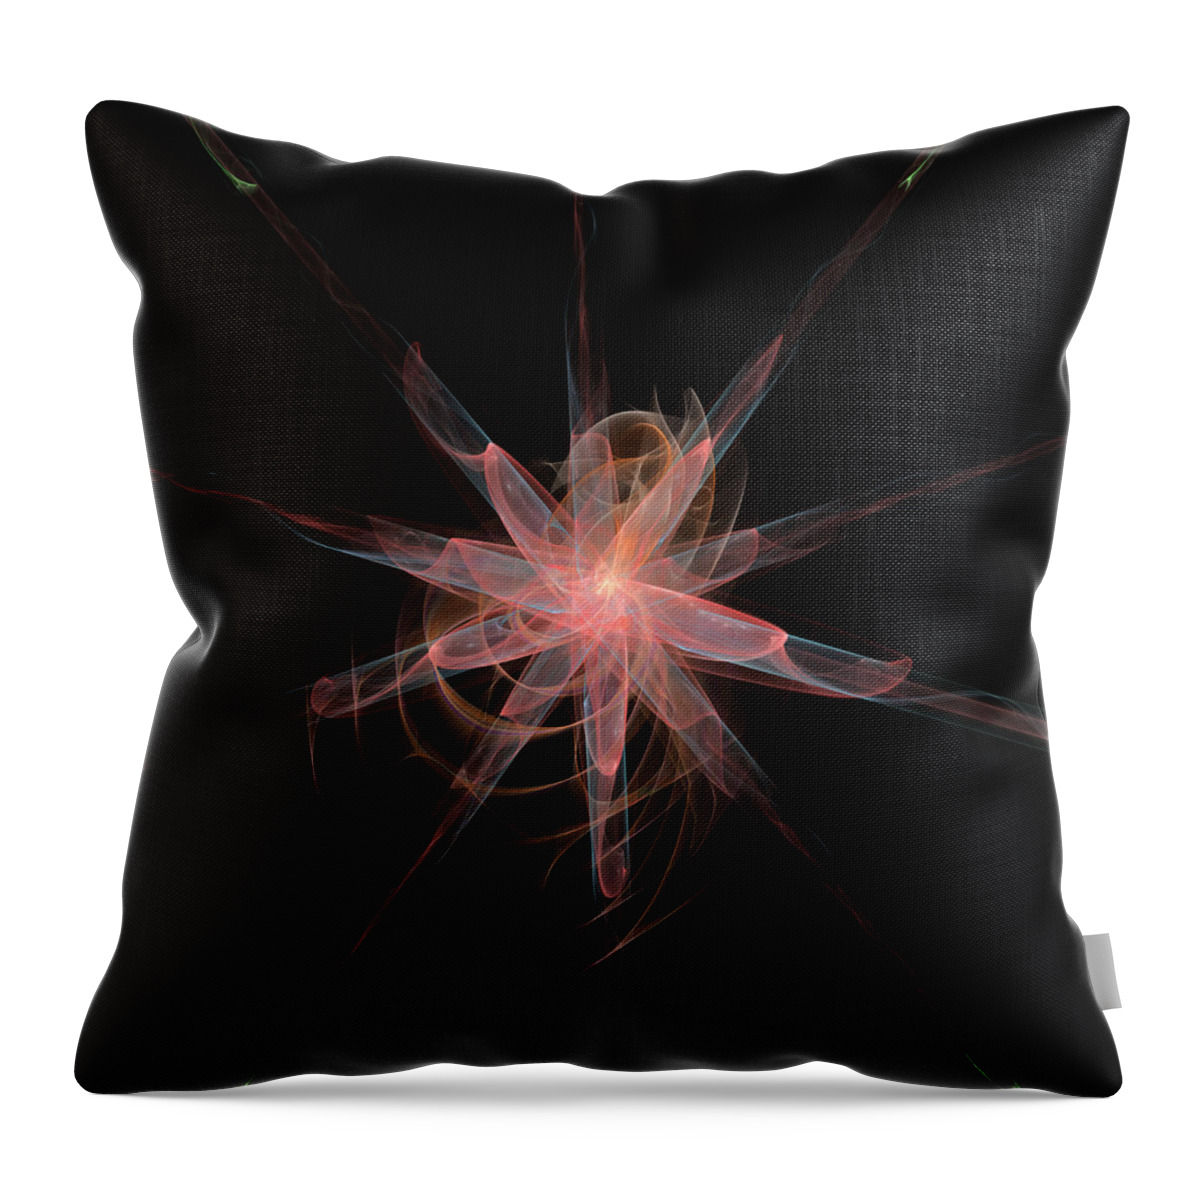 Fractal Throw Pillow featuring the digital art Fractal 3d render illustration with abstract floral motif by Lenka Rottova